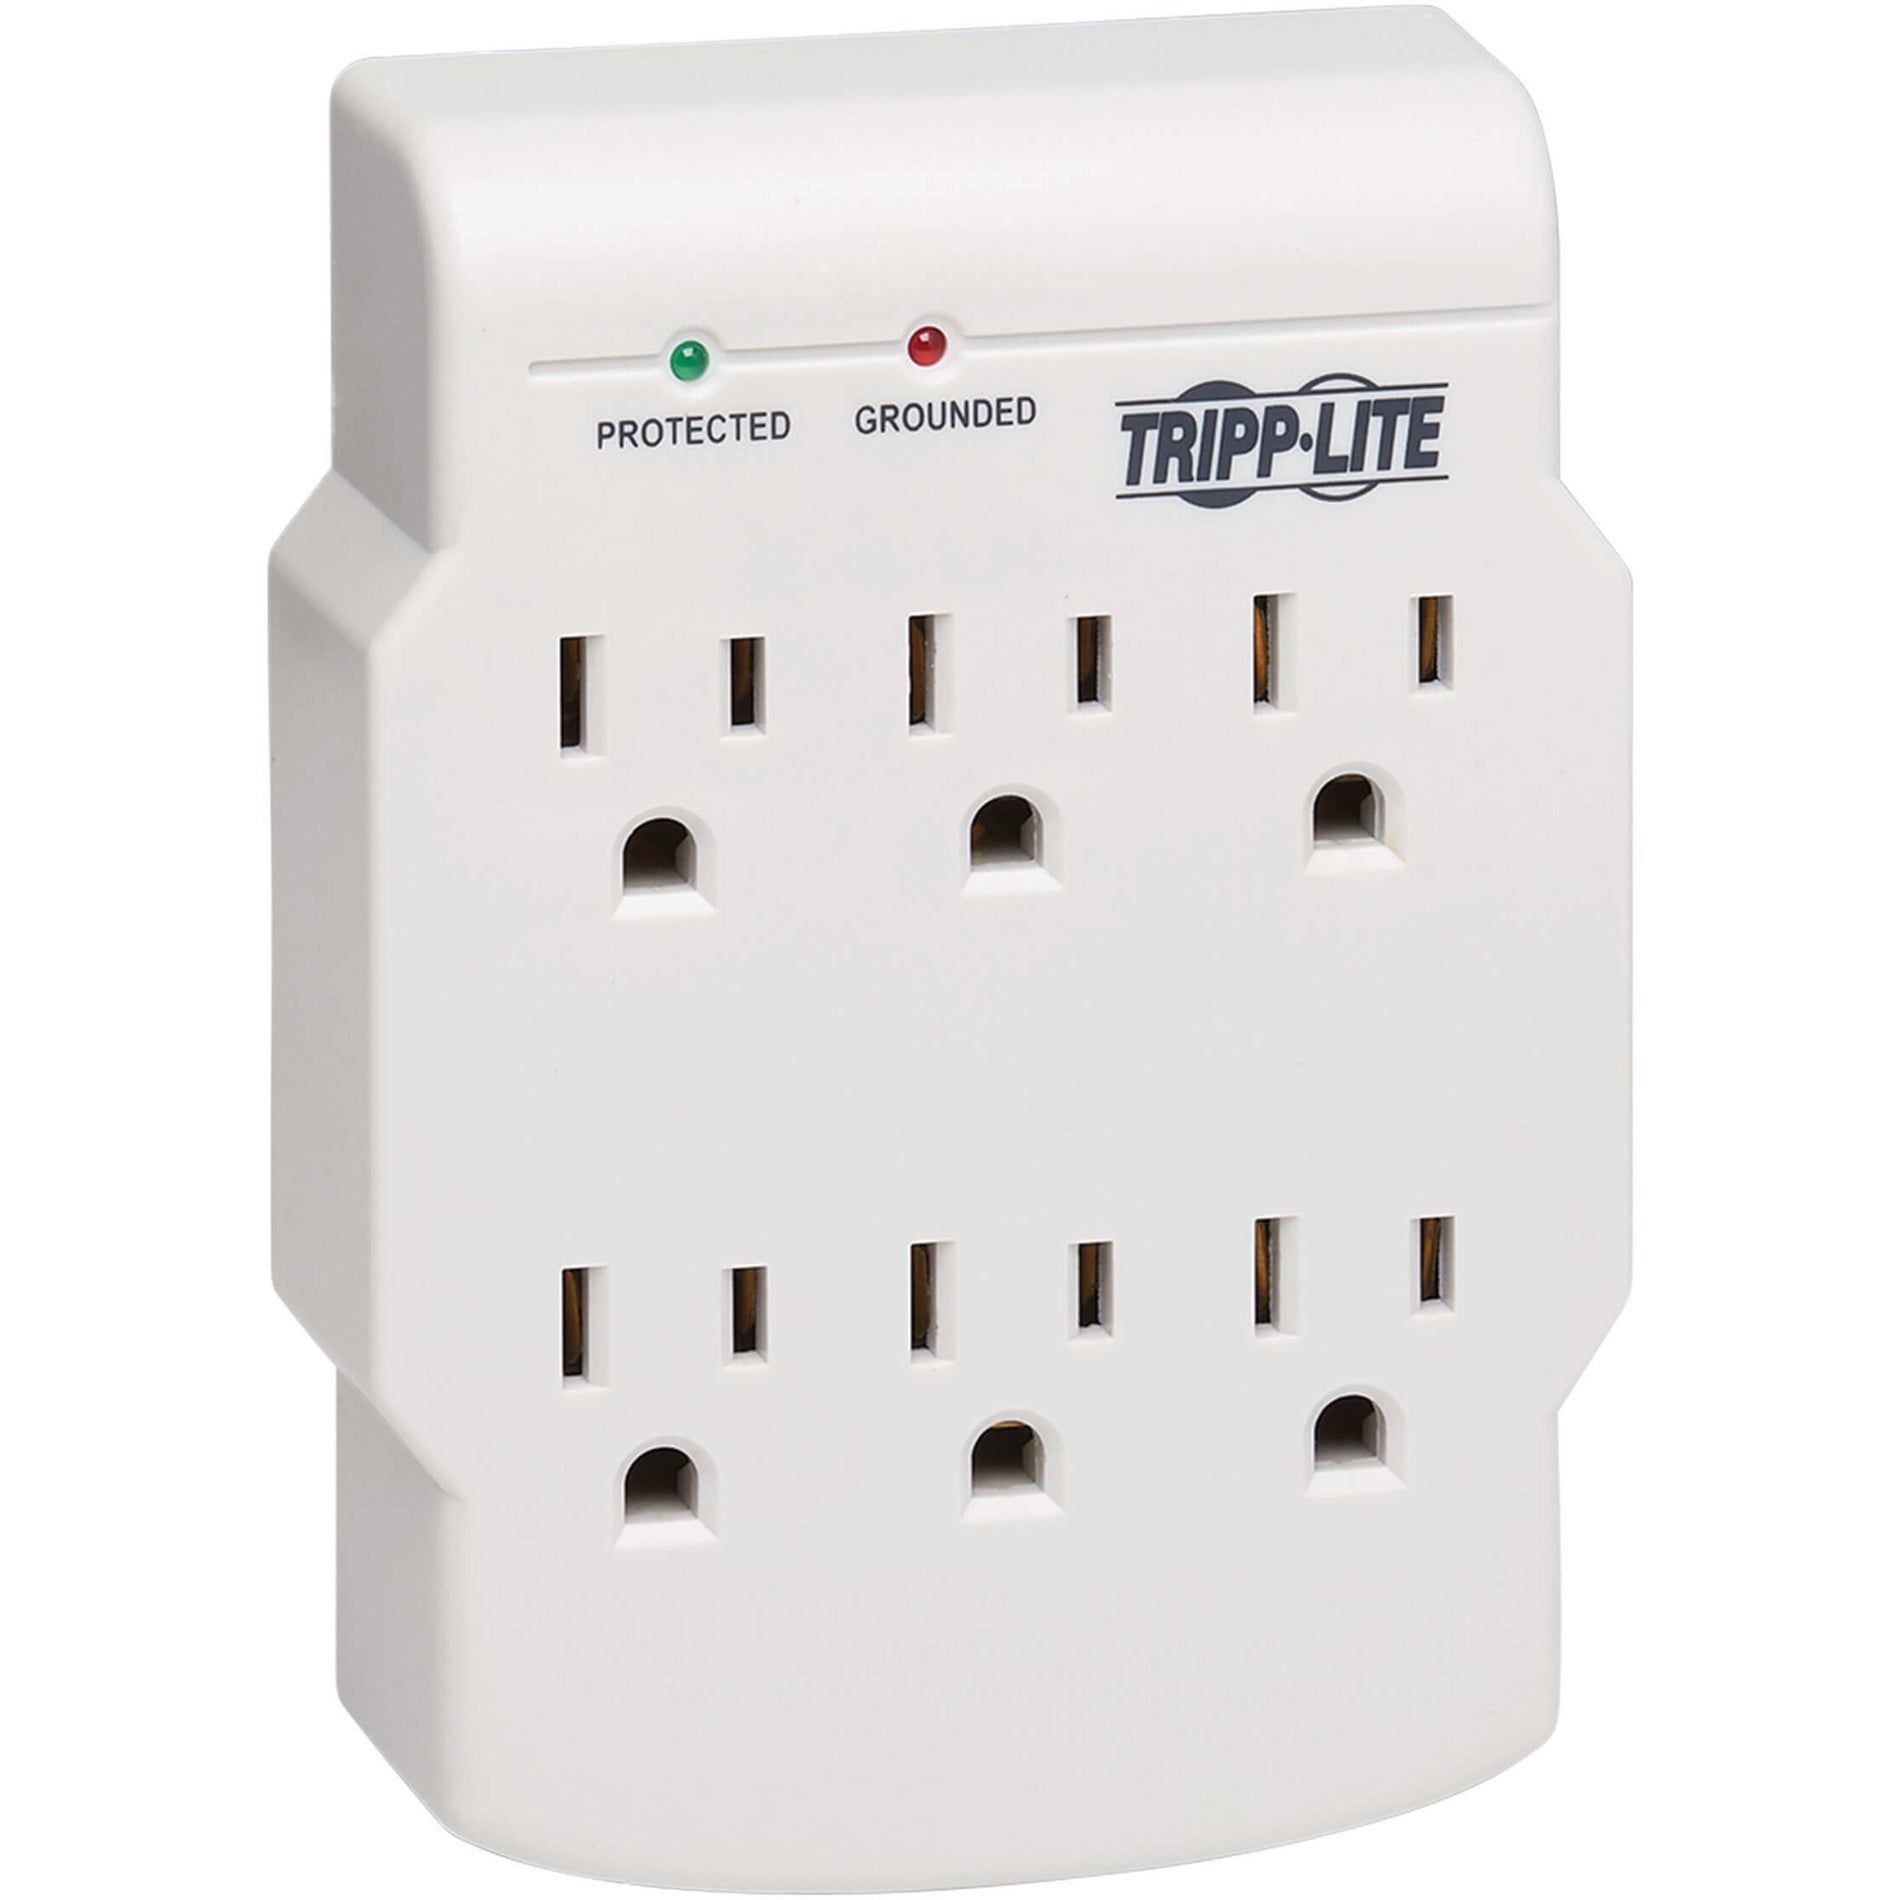 Tripp Lite SK6-0 6-Outlet Surge Suppressor, Protect Your Devices with 360 Joules of Surge Energy Absorption